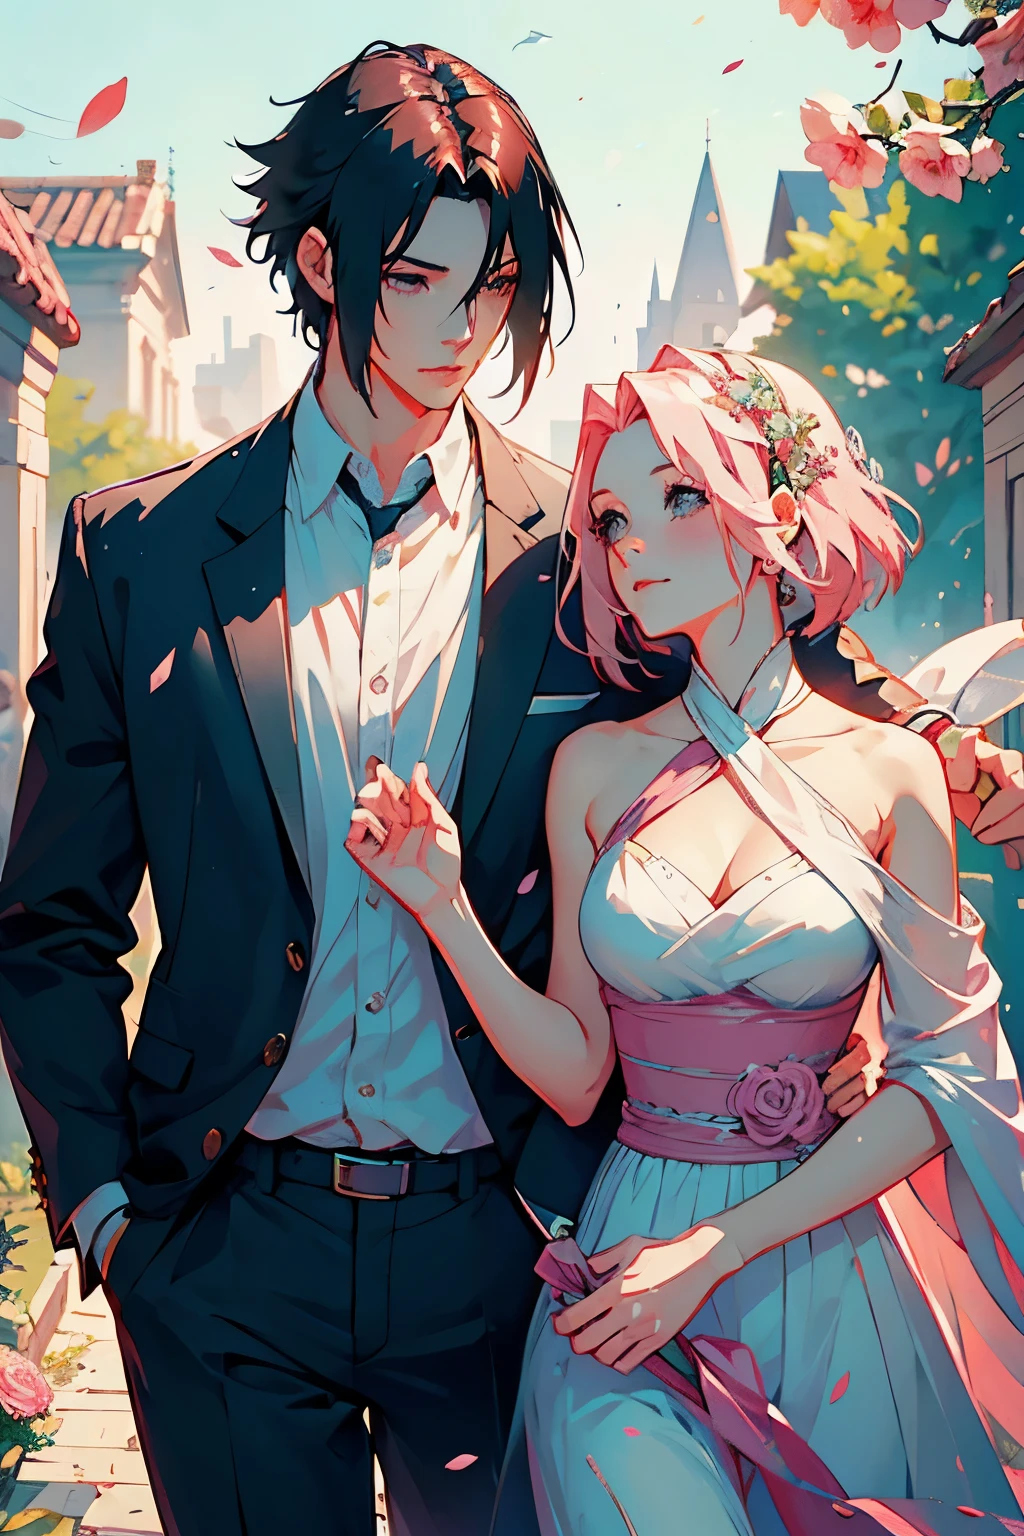 Sasusaku The couple in the photo are deeply in love and lost in the moment. Sasuke, The man is tall and handsome, with chiselled features and piercing black eyes. He has a confident and charismatic demeanor, And his love for the woman is evident in the way he looks at her with adoration. He's wearing a white shirt, increasing its sophisticated and refined appearance. The woman is equally stunning with soft features and delicate strokes, low water. Ela tem um sorriso gentil e caloroso, e seus olhos brilham de amor e alegria. Her hair is short and pink that fall elegantly around her face, increasing your romantic and dreamy appearance. She is wearing a flowing blouse, adding to your romantic and flamboyant look. Junto, o casal parece ter acabado de sair de um conto de fadas. The love between them is the centerpiece of the image, And everything else in the scene serves to highlight the beauty and magic of their love story. They are alone. (Duas pessoas). it&#39;s night, They are in a garden.